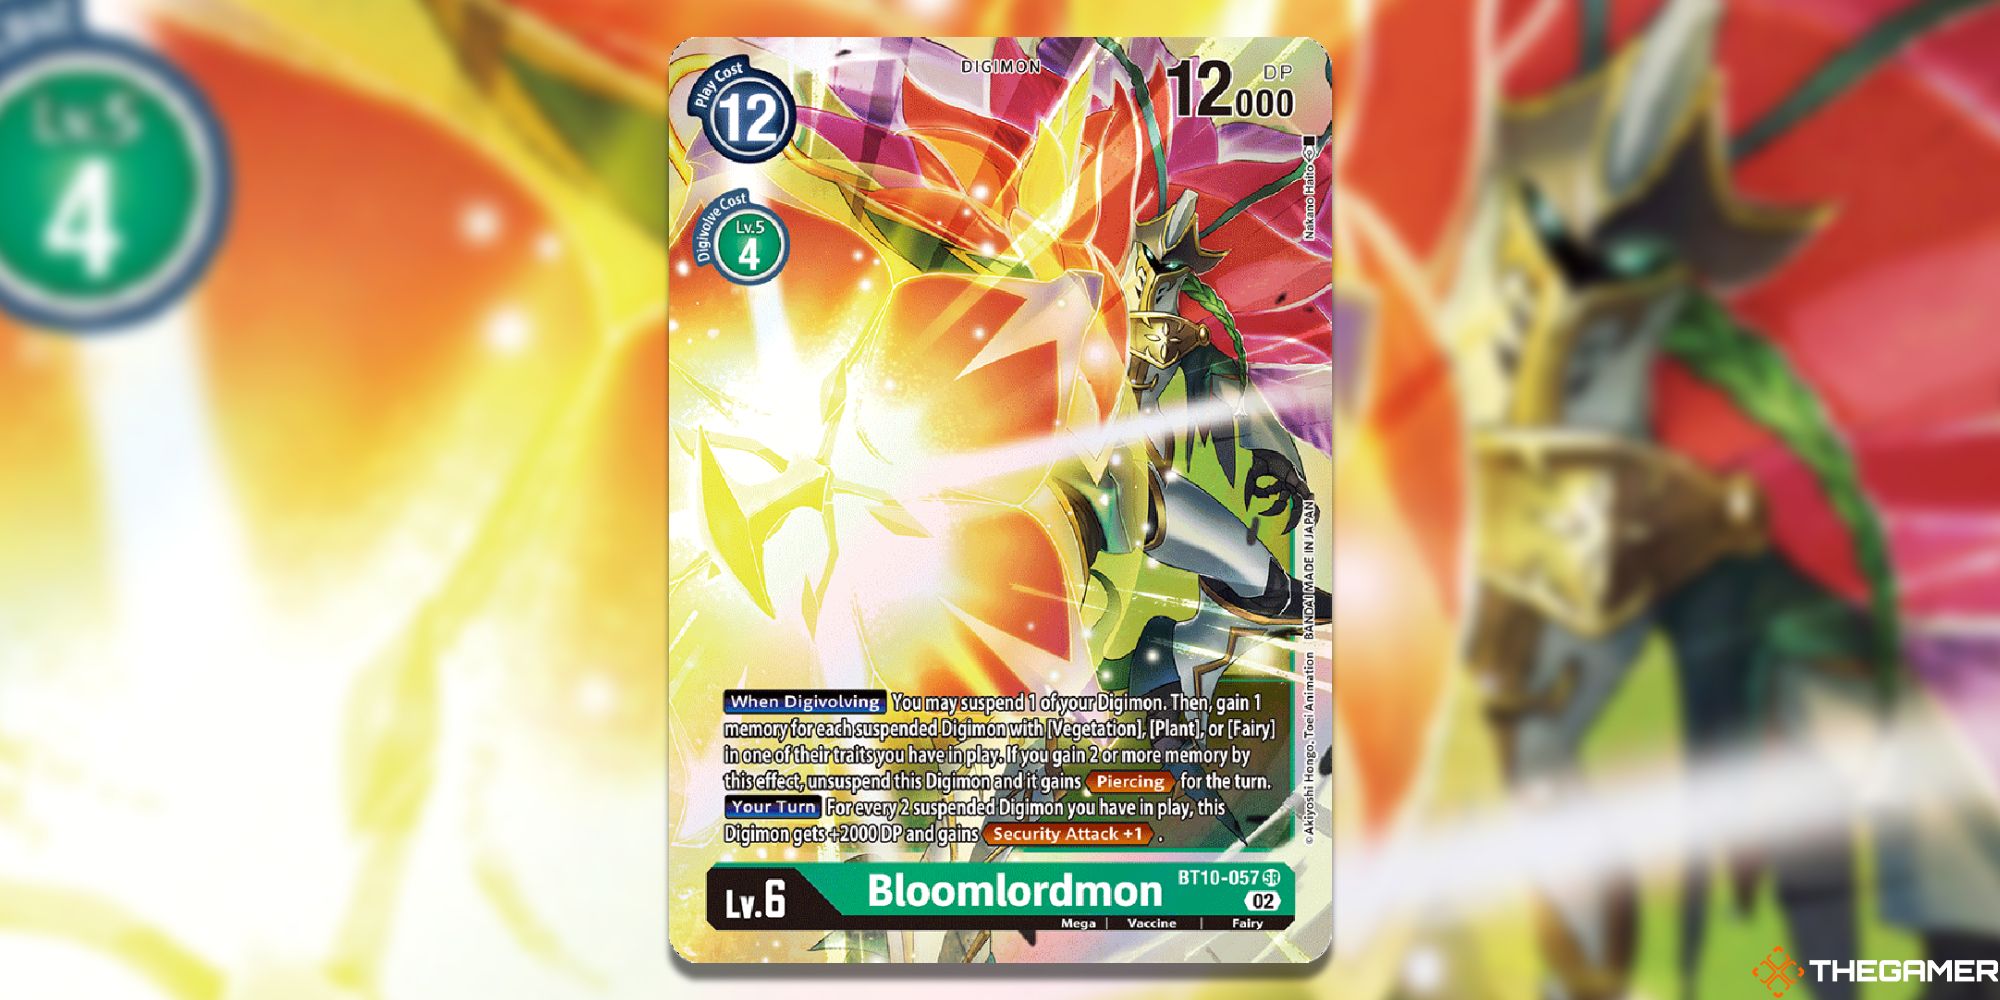 bloomlordmon card from digimon card game with blur background